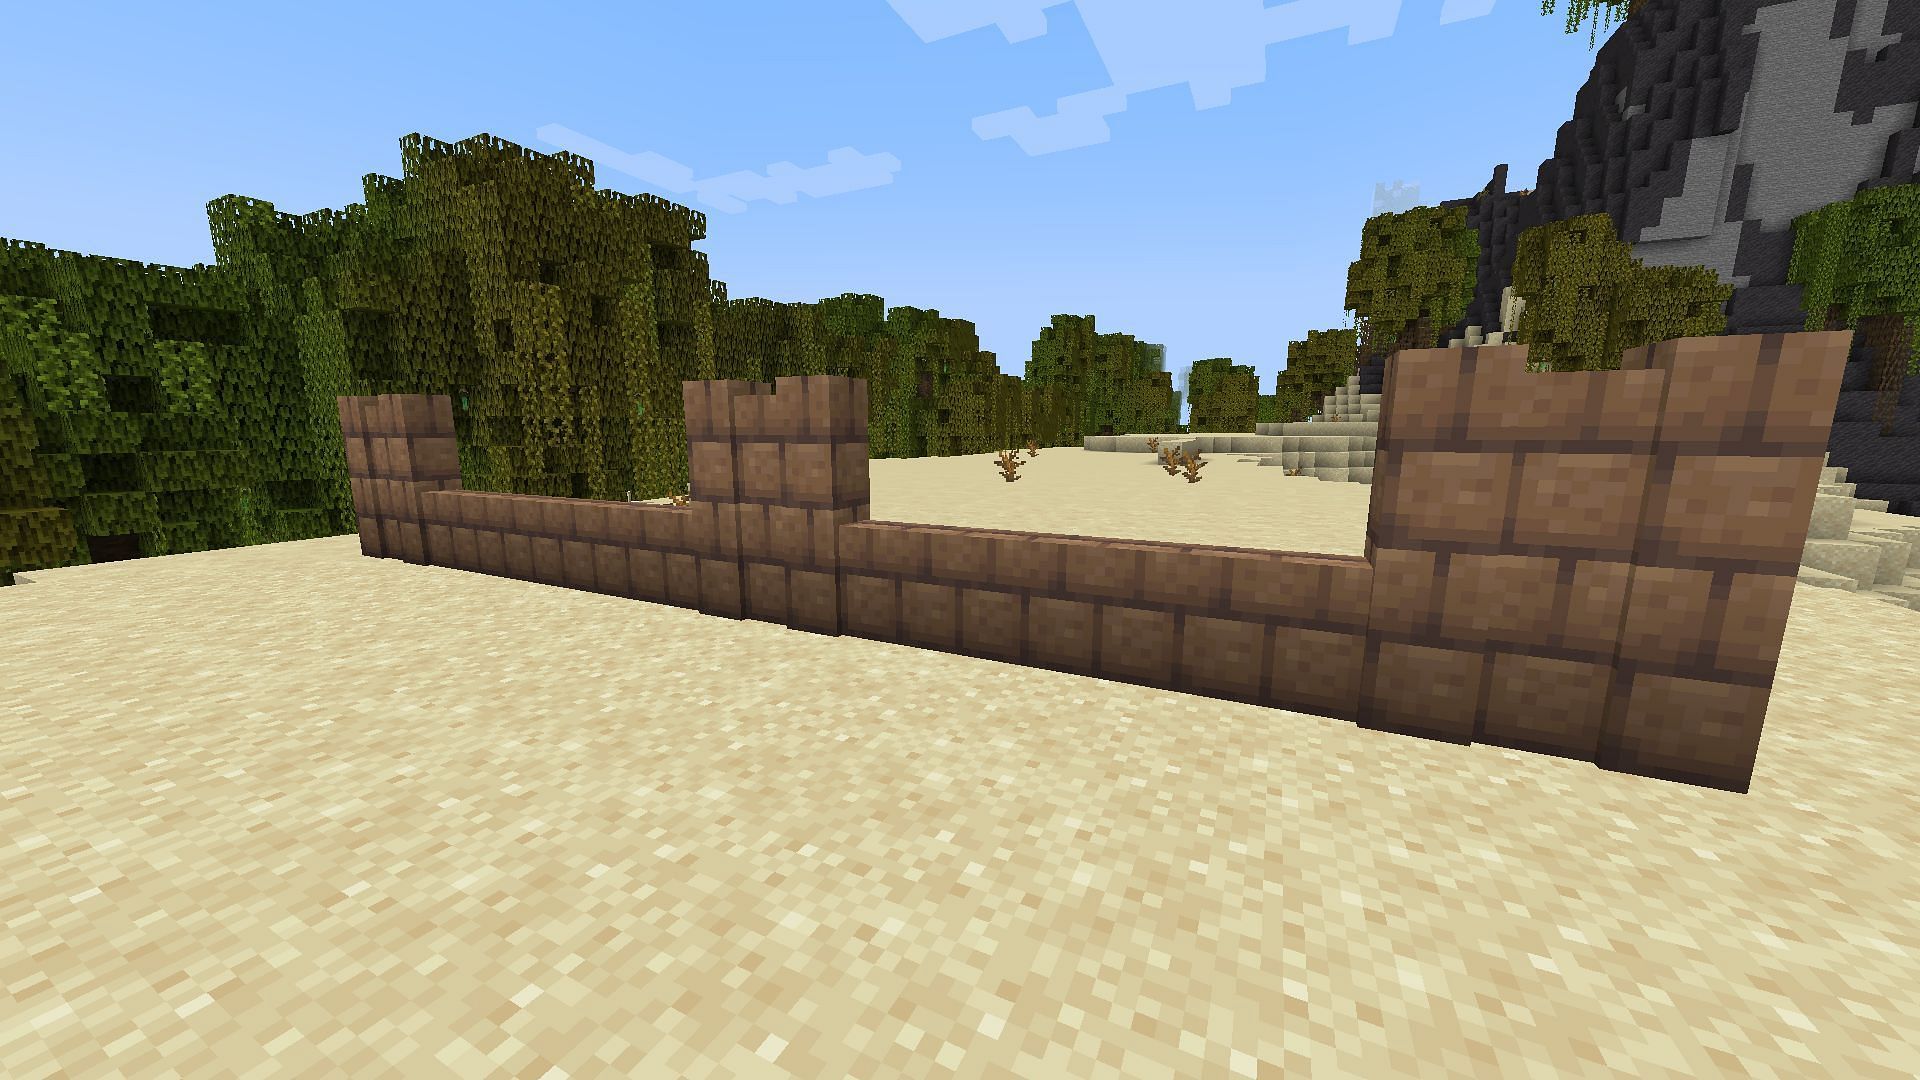 Mud brick walls can be used as fences (Image via Minecraft 1.19 update)